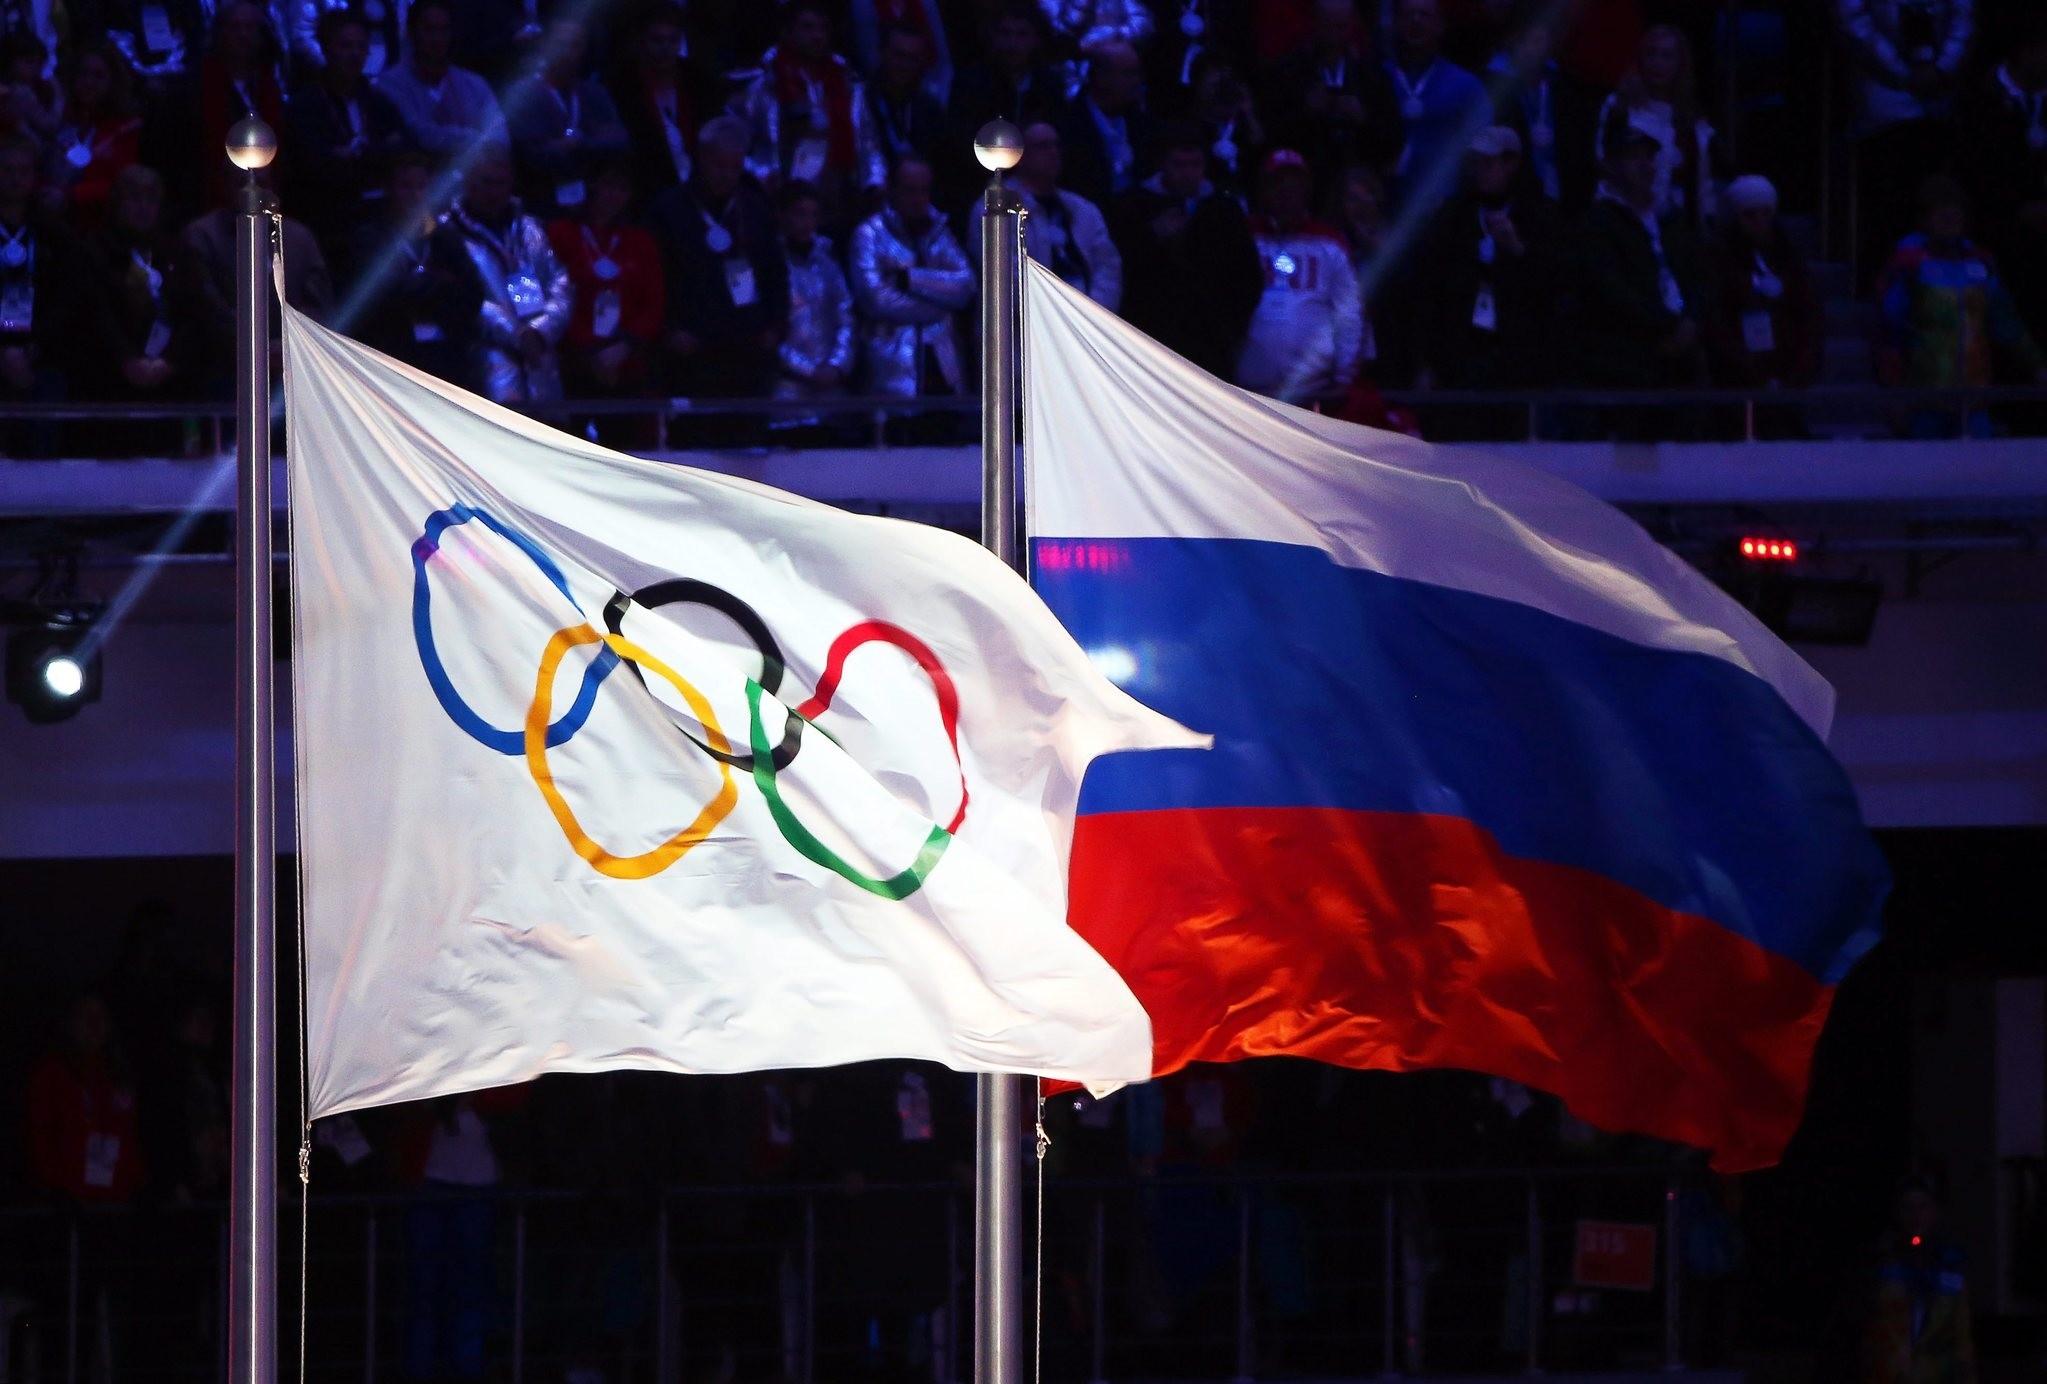 A file picture dated 23 February 2014 of the Olympic flag (L) and the Russian flag (R) during the Closing Ceremony of the Sochi 2014 Olympic Games in the Fisht Olympic Stadium in Sochi, Russia. (EPA Photo)